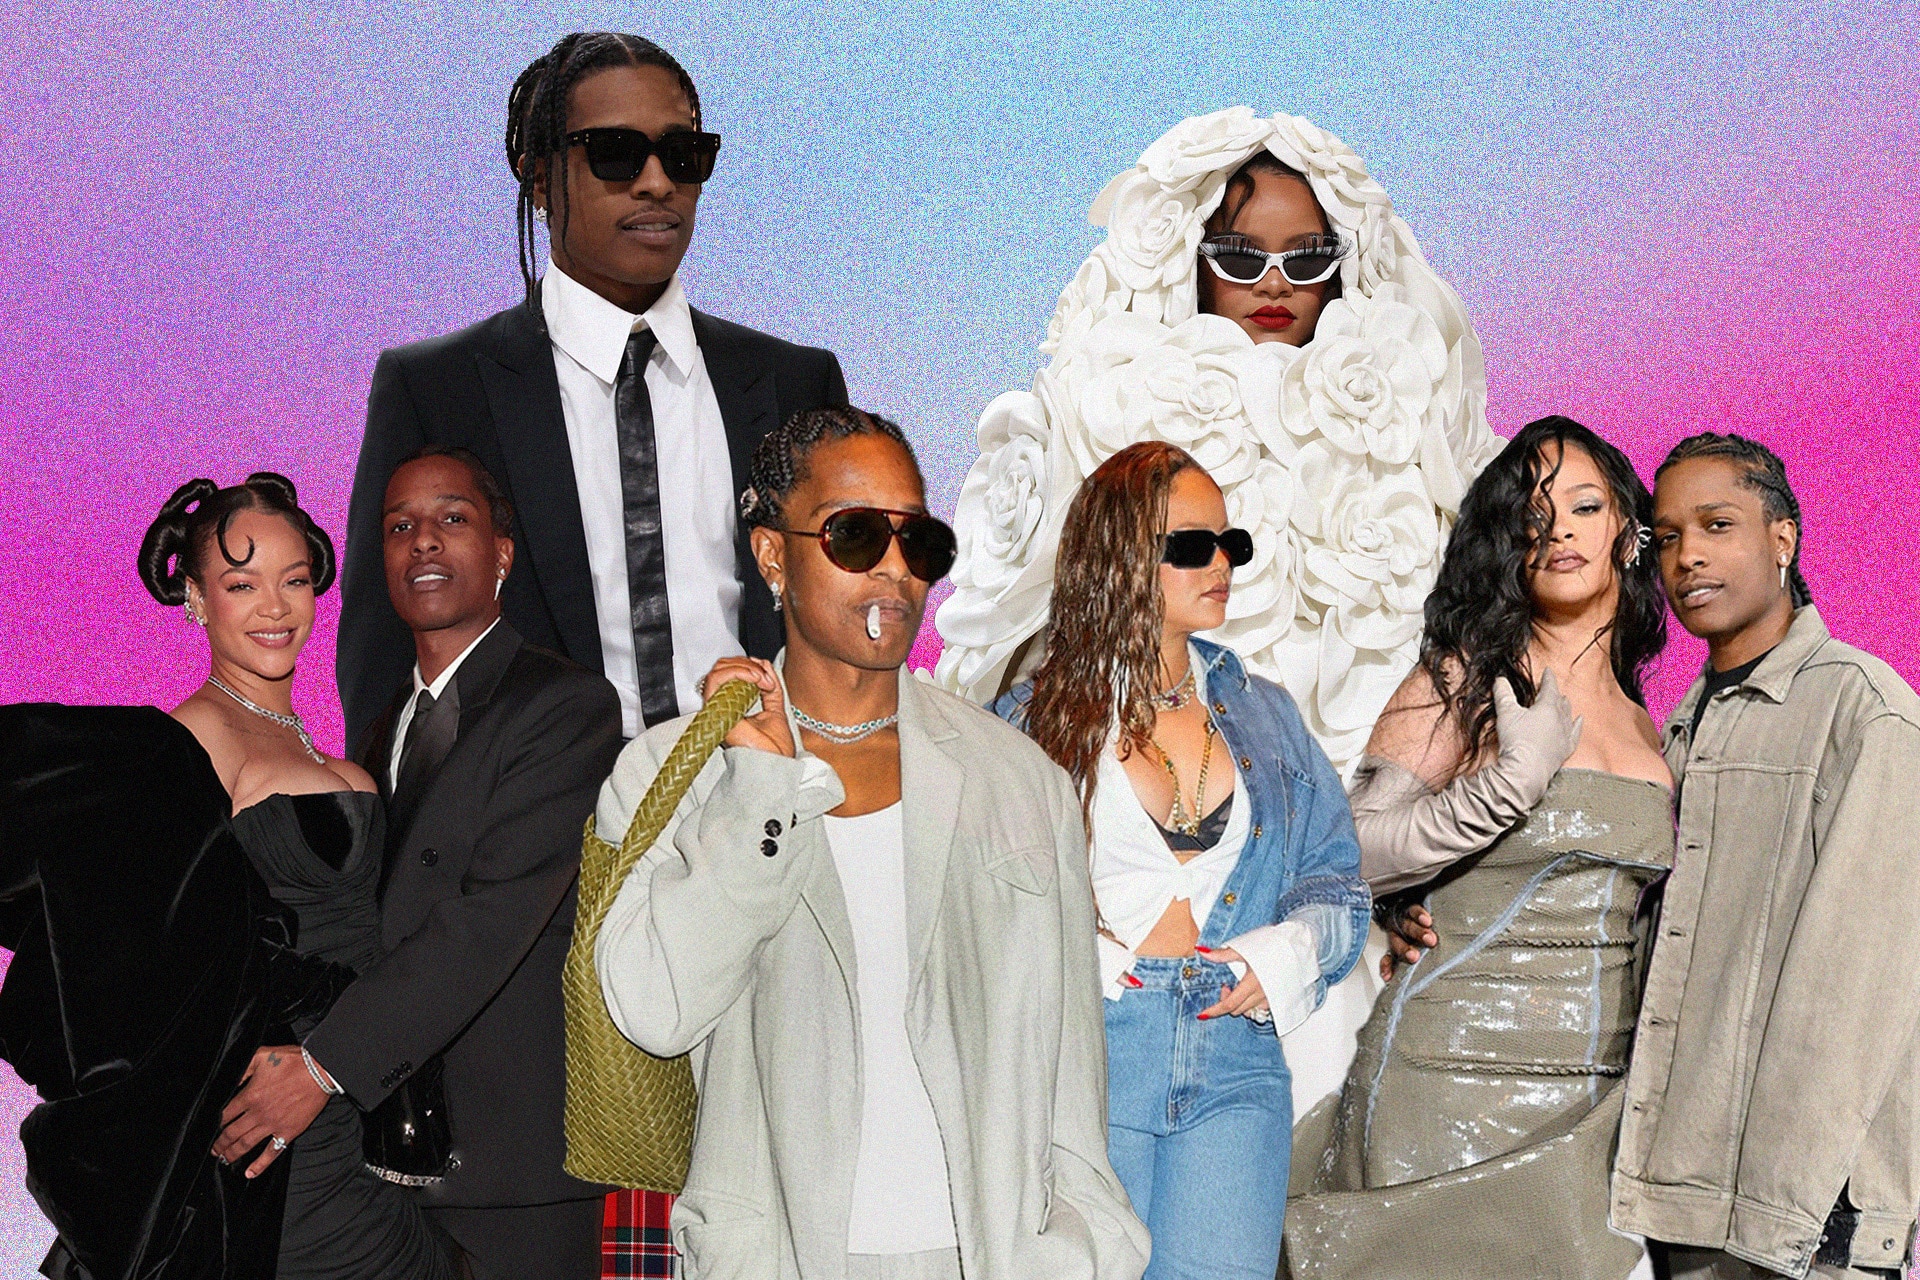 ASAP Rocky and Rihanna have got couple dressing down